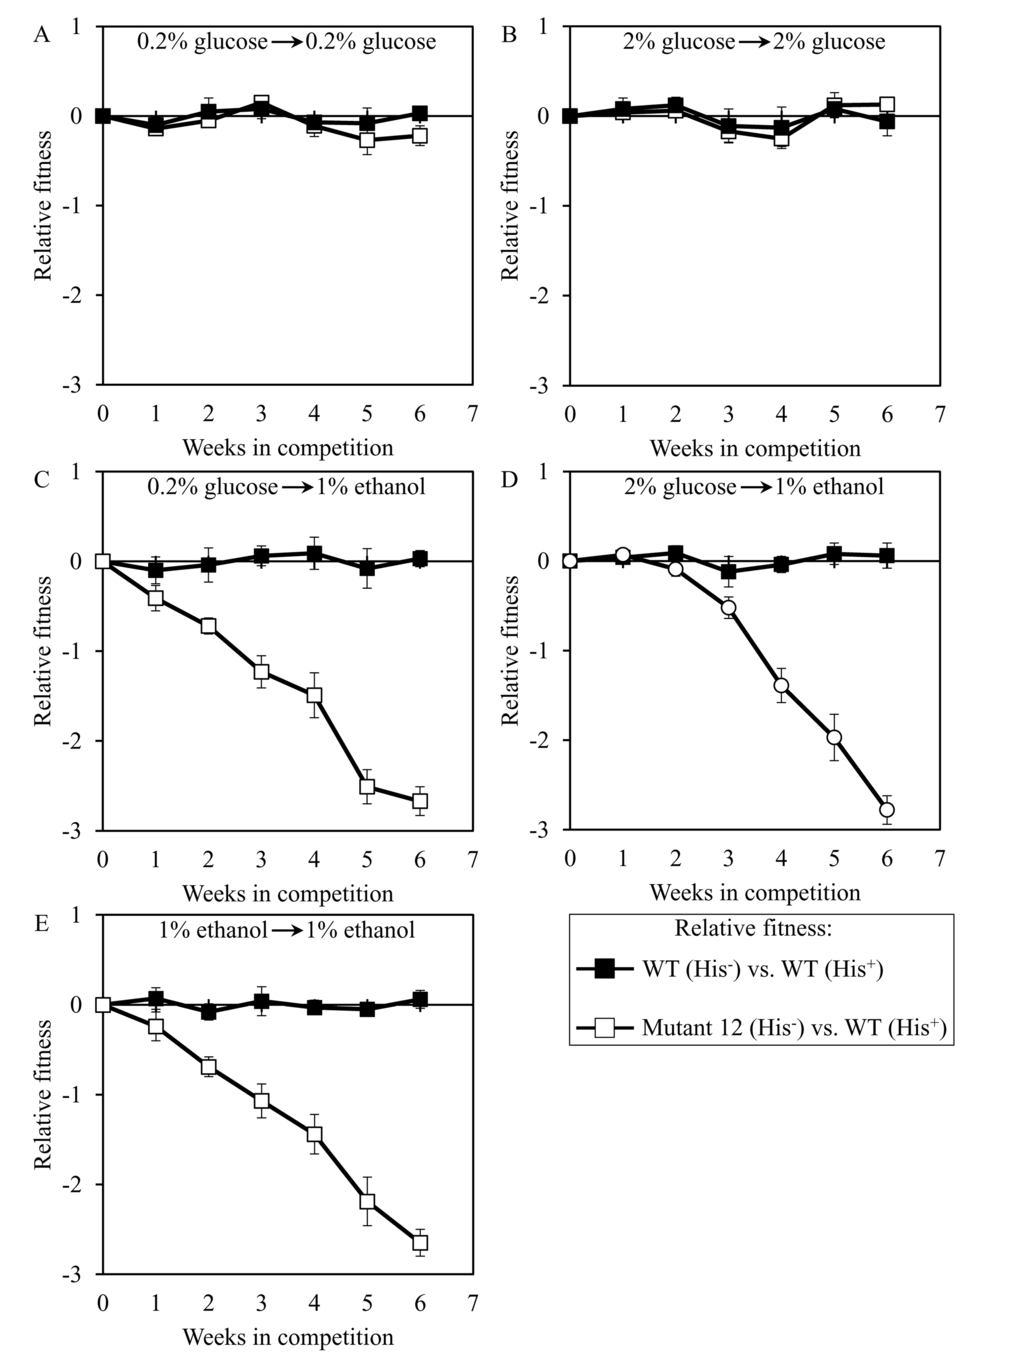 Dominant polygenic trait extending longevity of the long-lived yeast mutant 12 decreases its relative fitness in medium initially containing 1% ethanol. The WT strains BY4742 (His-) and BY4739 (His+, but otherwise isogenic to BY4742) were cultured separately in the complete YP medium containing 0.2% glucose, 2% glucose or 1% ethanol glucose until mid-exponential phase. Another pair of strains whose relative fitness was measured, namely the long-lived mutant strain 12 (His-; selected during lasting exposure of BY4742 to LCA) and the WT strain BY4739 (His+), was also cultured separately in YP medium containing 0.2% glucose 2% glucose or 1% ethanol glucose until mid-exponential phase. Cells of the His+ strain were mixed with the same number of cells of the His- strain and then co-cultured for 7 days in liquid YP medium initially containing different carbon sources. Cells of the His- and His+ strains pre-cultured separately on 0.2% glucose were subjected to direct fitness competition by being cultured together on 0.2% glucose (A) or 1% ethanol (C). Cells of the His- and His+ strains pre-cultured separately on 2% glucose were subjected to direct fitness competition by being cultured together on 2% glucose (B) or 1% ethanol (D). Cells of the His- and His+ strains pre-cultured separately on 1% ethanol were subjected to direct fitness competition by being cultured together on 1% ethanol (E). After culturing the cell mixture for 7 days, an aliquot of cell suspension was used to measure the relative fitness of the His+ strain in a direct competition with the His- strain (as described in ″Materials and Methods″). The direct fitness competition step of culturing a cell mixture for 7 days in liquid YP medium was repeated 6 times.